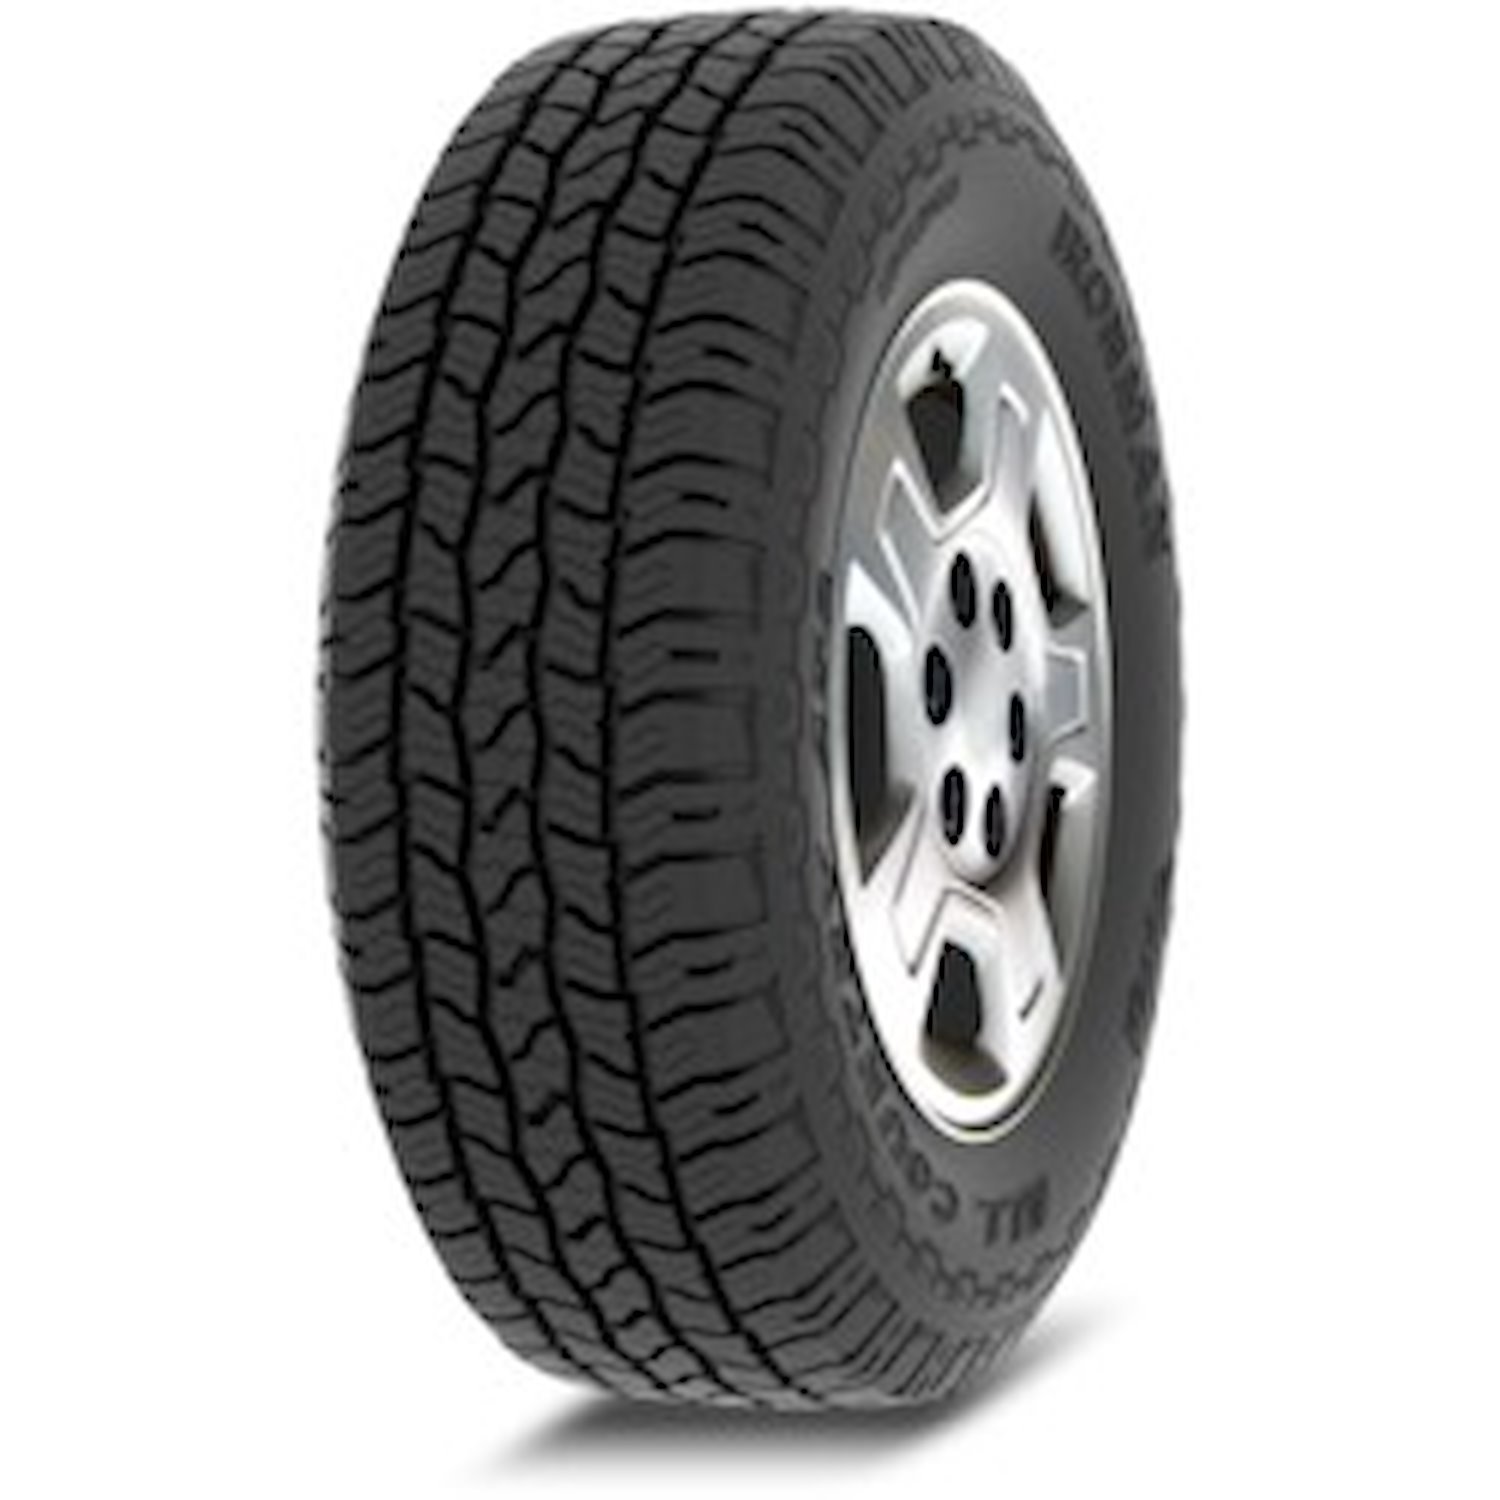 07580 All Country AT2 Tire, 235/75R15XL, 109T